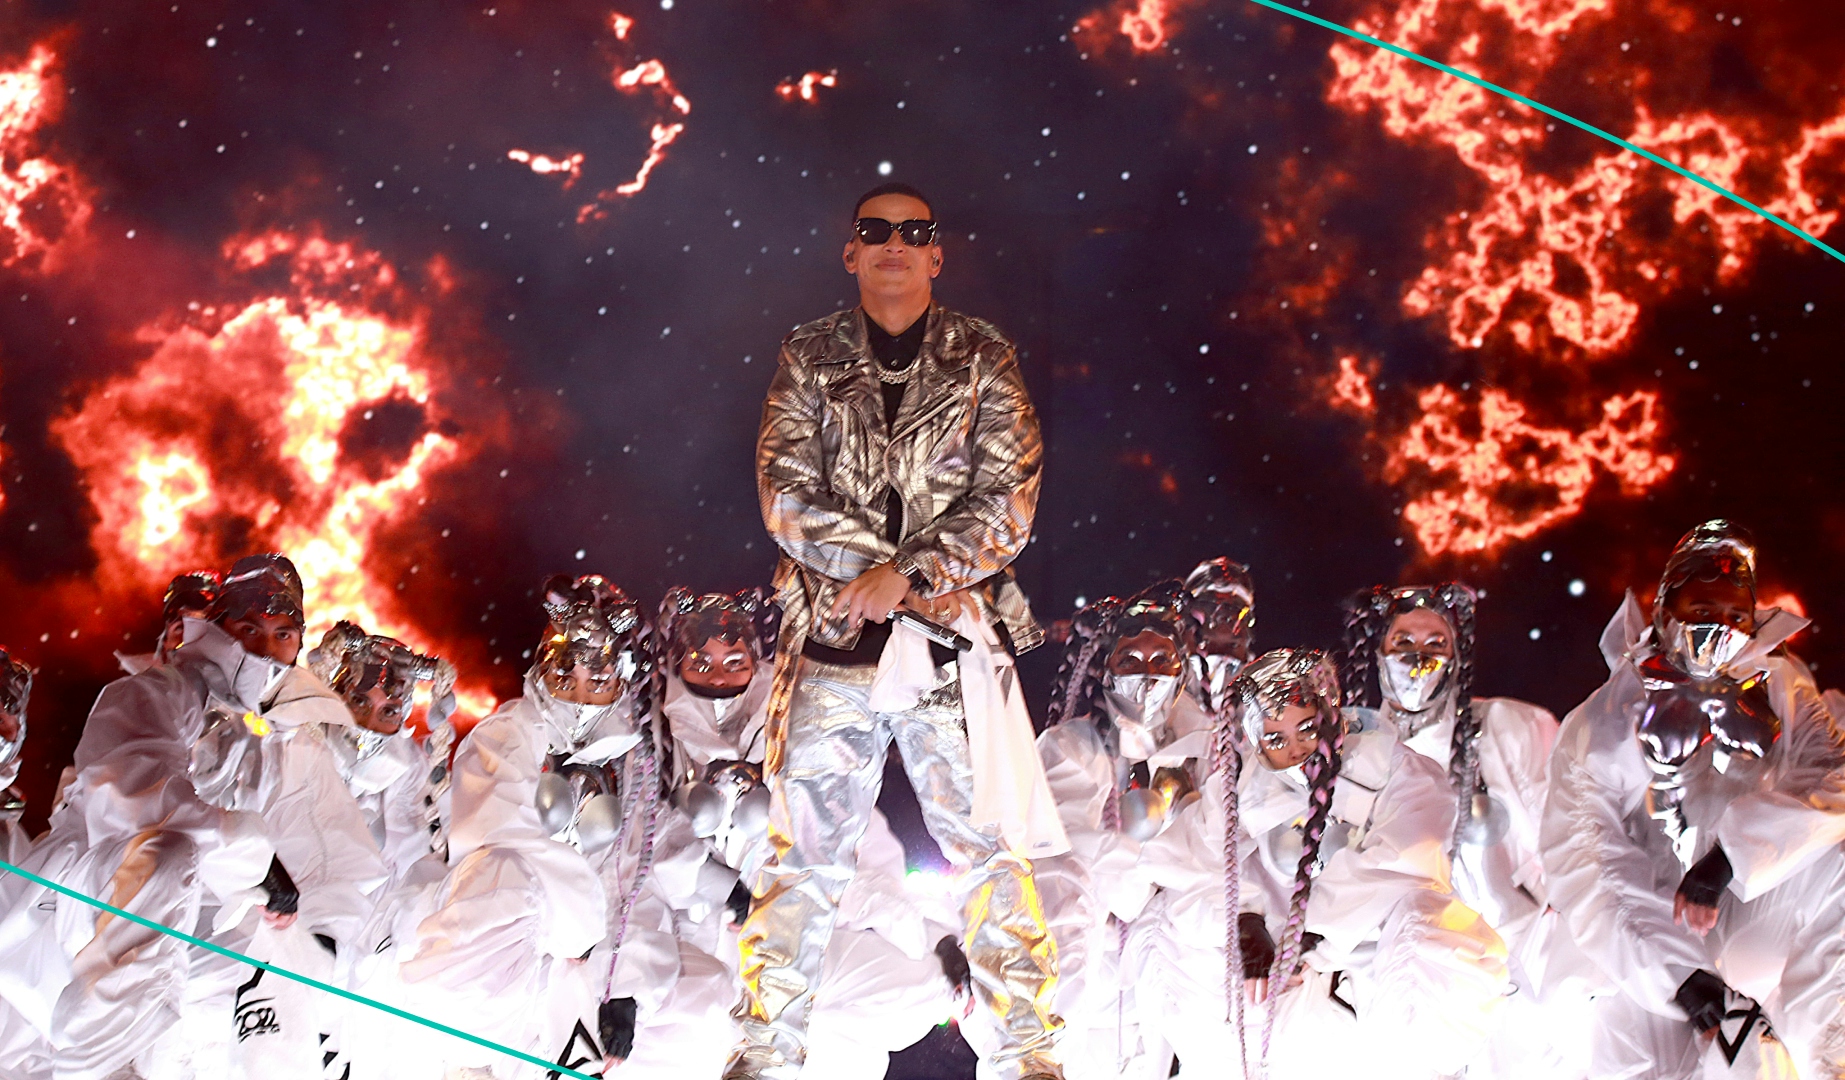 Daddy Yankee on stage performing